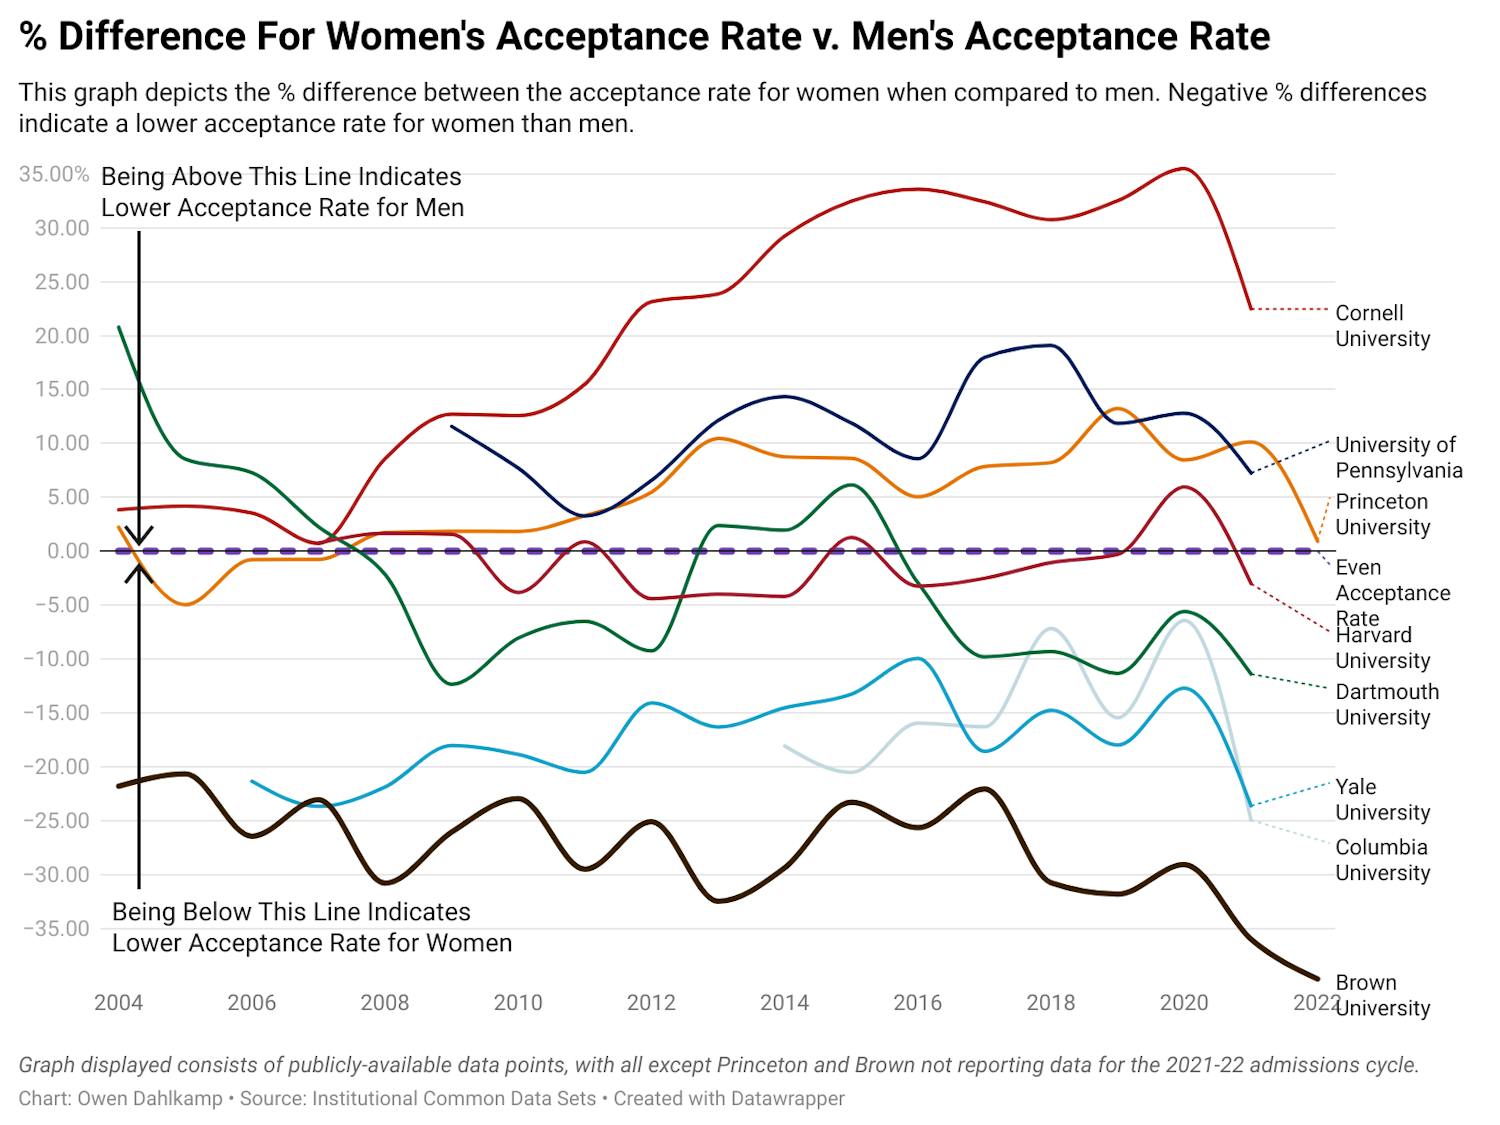 g2ugD--difference-for-women-s-acceptance-rate-v-men-s-acceptance-rate copy.png